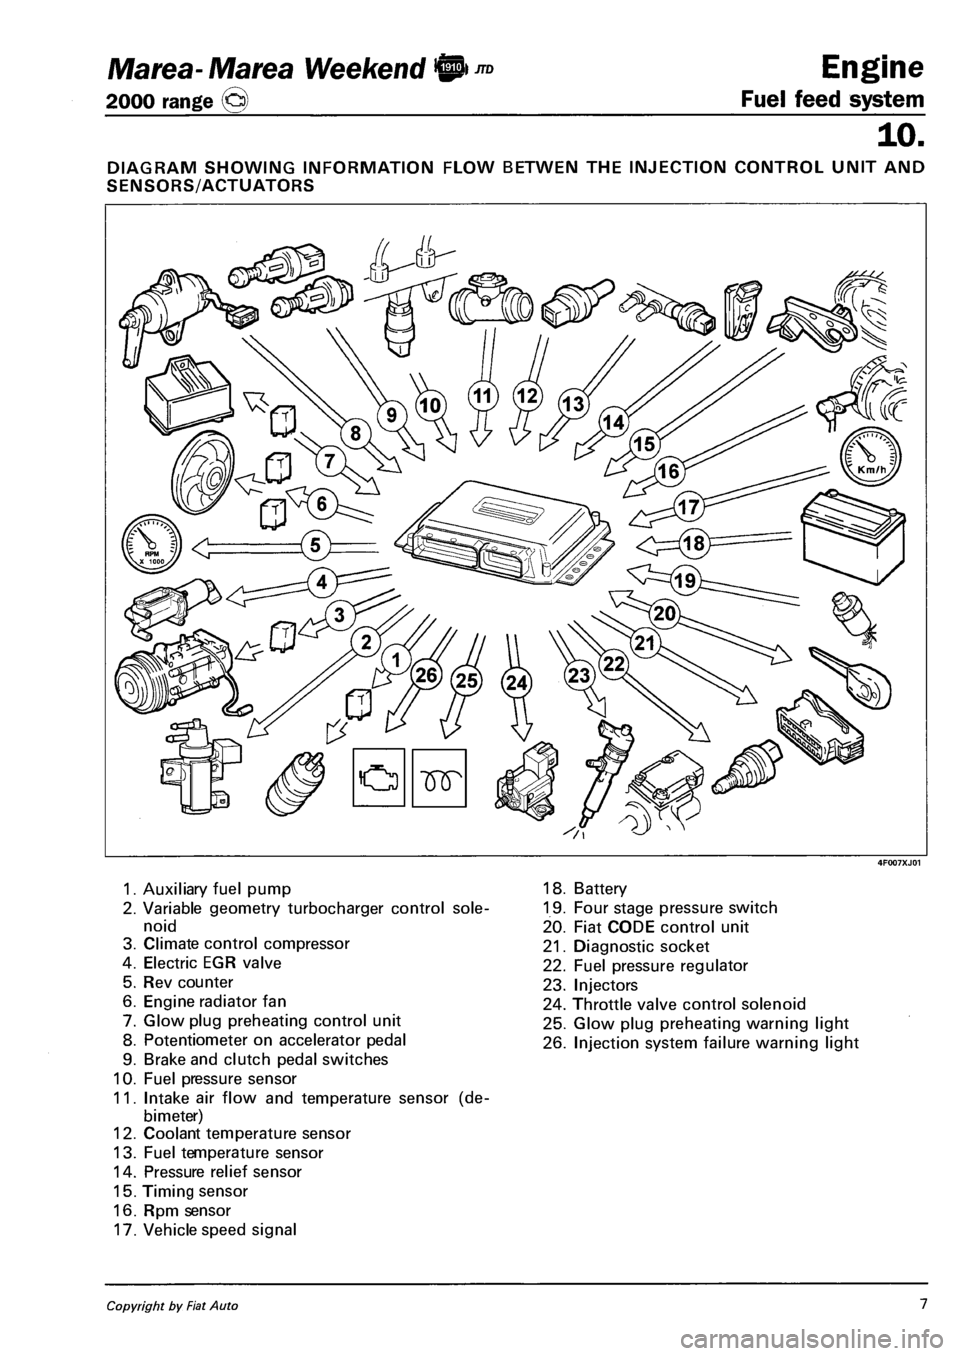 FIAT MAREA 2000 1.G Workshop Manual Marea- Marea Weekend 9 ™ 
2000 range © 
Engine 
Fuel feed system 
10. 
DIAGRAM SHOWING INFORMATION FLOW BETWEN THE INJECTION CONTROL UNIT AND 
SENSORS/ACTUATORS 
1. Auxiliary fuel pump 
2. Variable